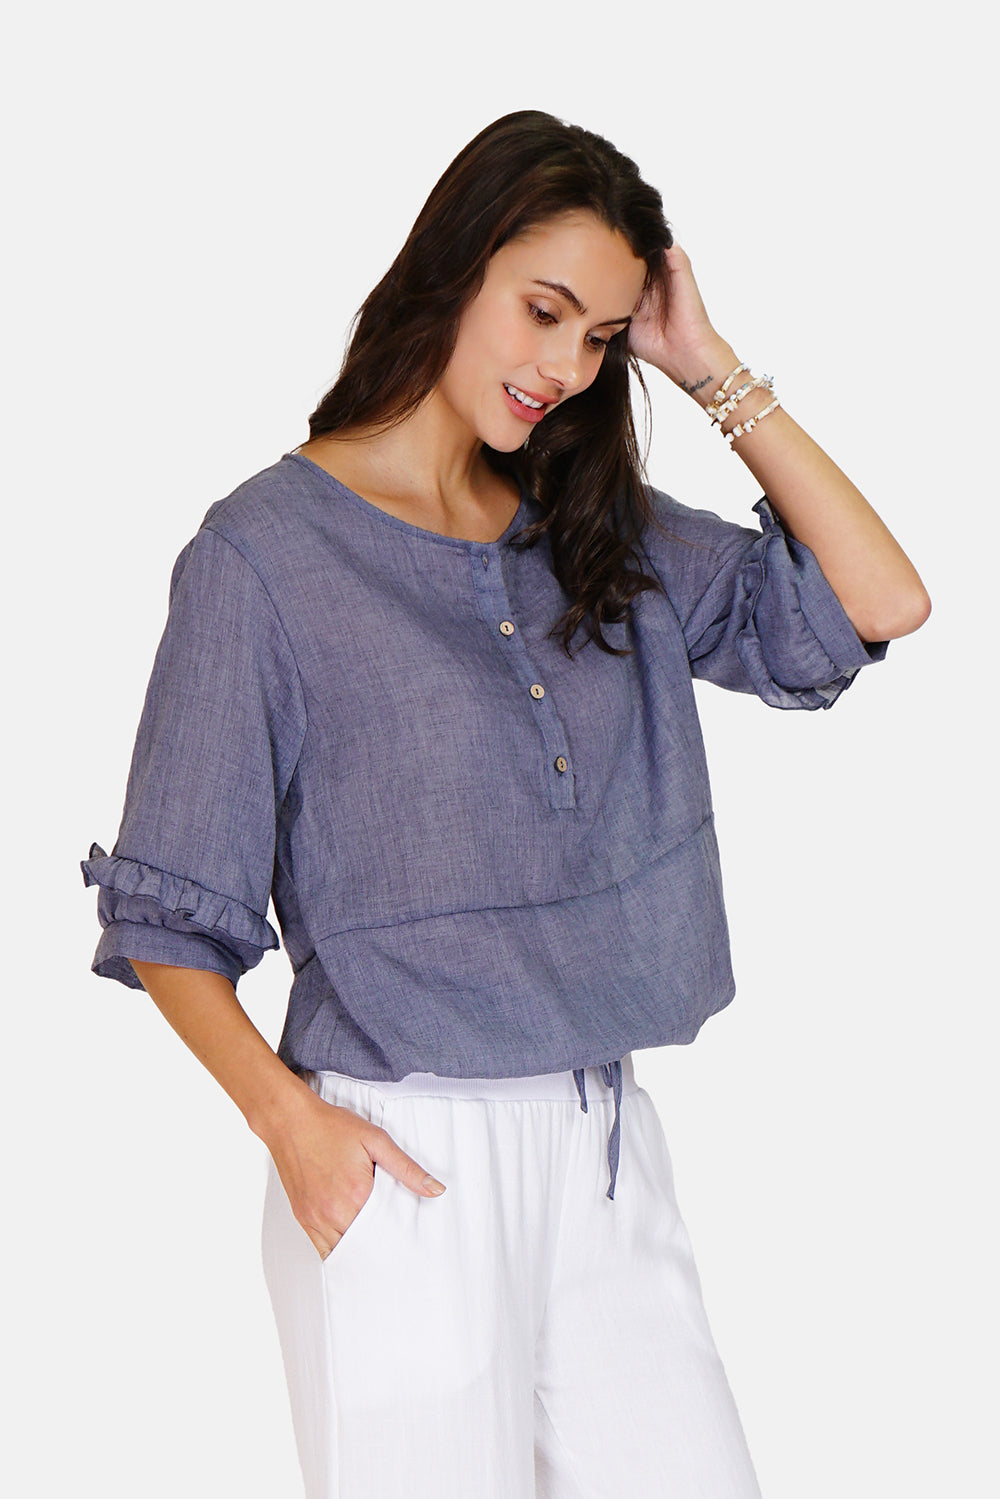 Wide buttoned top with ruffles on the 3/4 sleeves